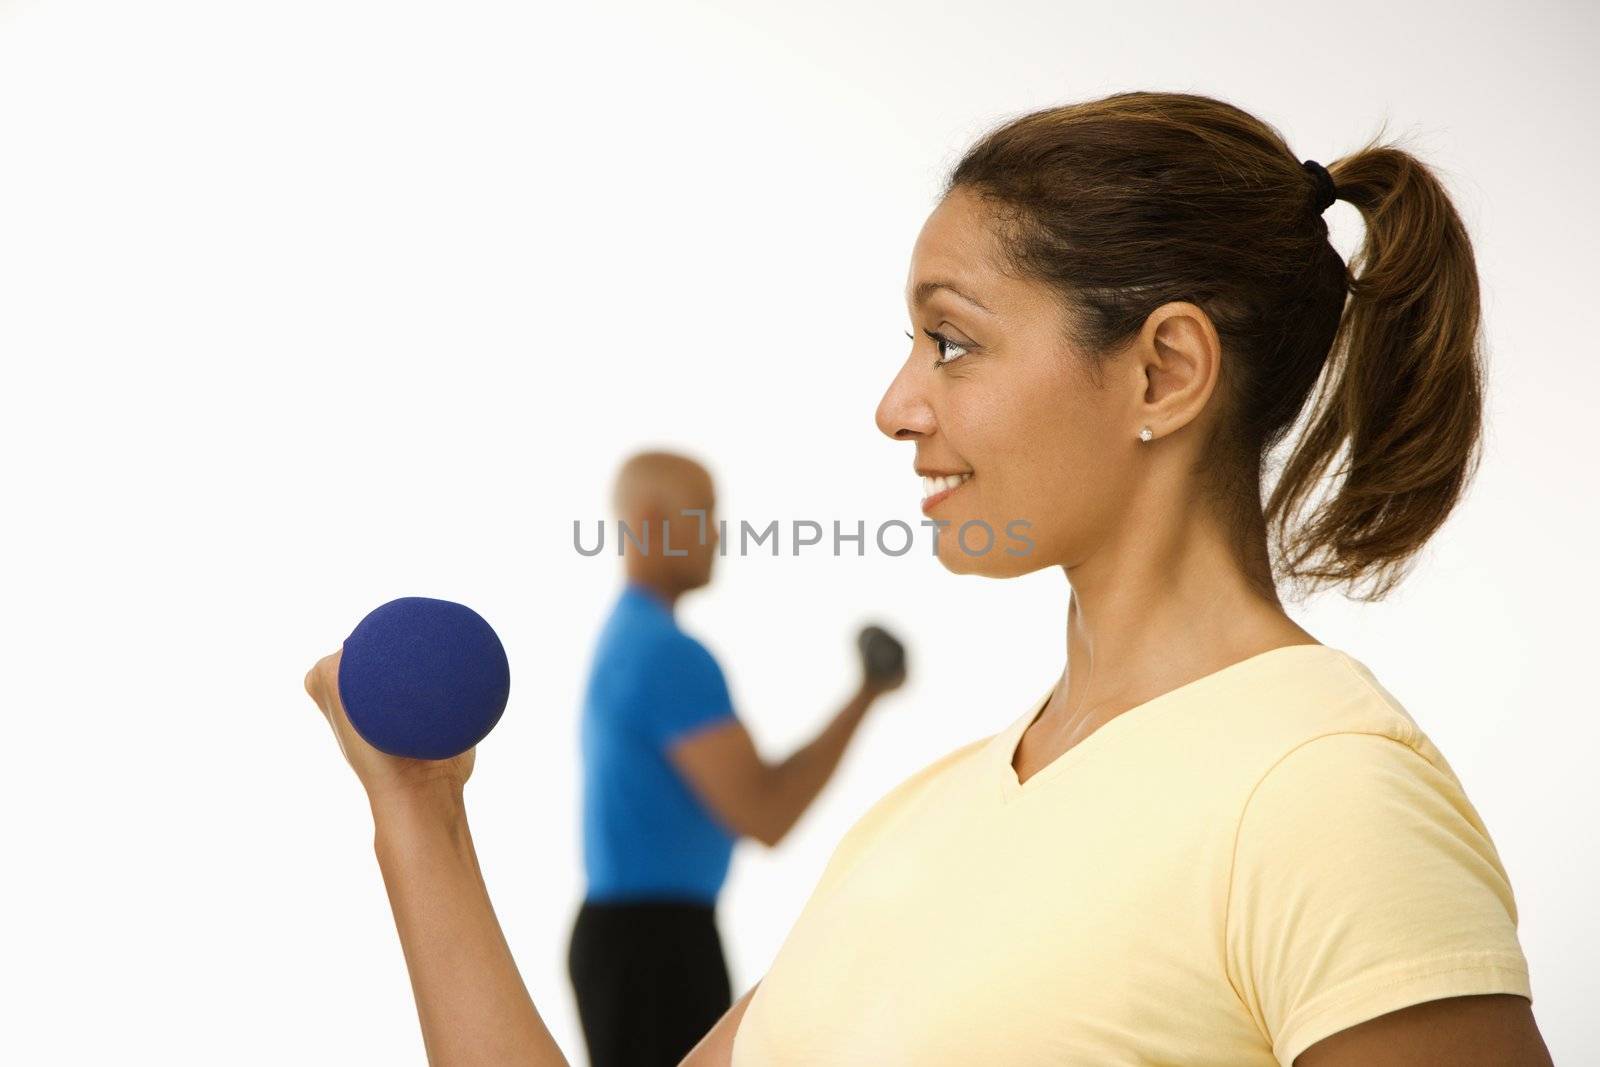 Close up of smiling mid adult multiethnic woman exercising using dumbbells with mid adult multiethnic man in background.